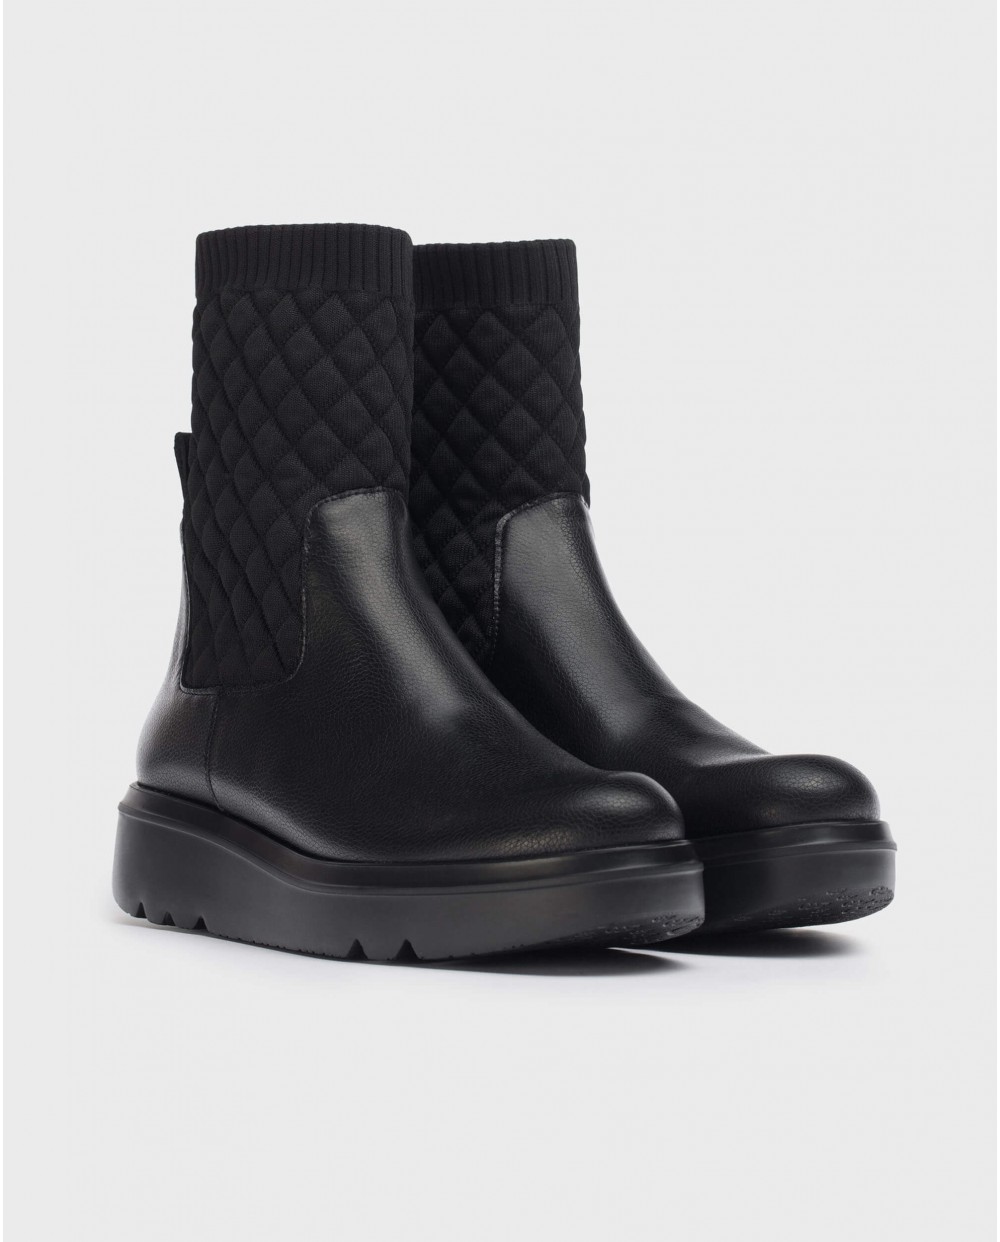 Wonders-Boots-Black PUFF Ankle Boot